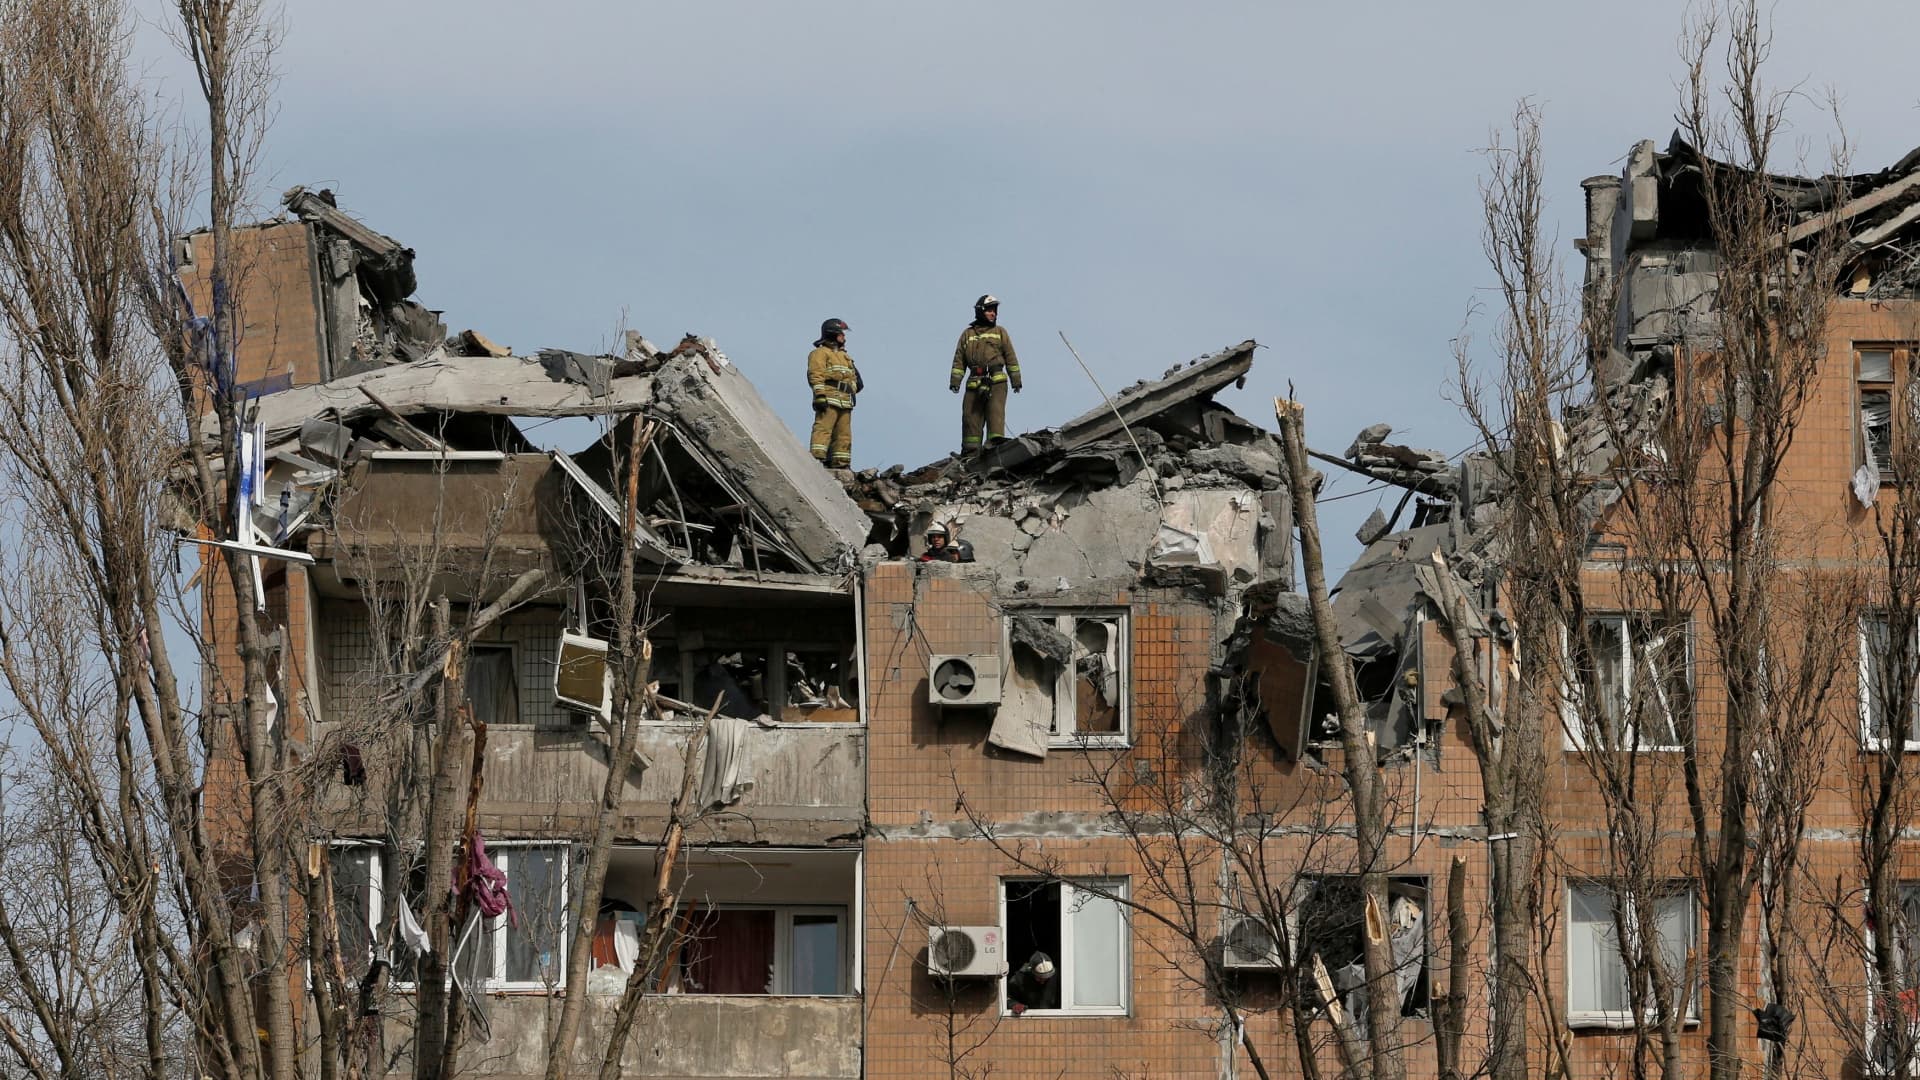 Emergency specialists work at a residential building damaged by shelling during Ukraine-Russia conflict in the separatist-controlled city of Donetsk, Ukraine, on March 30, 2022.